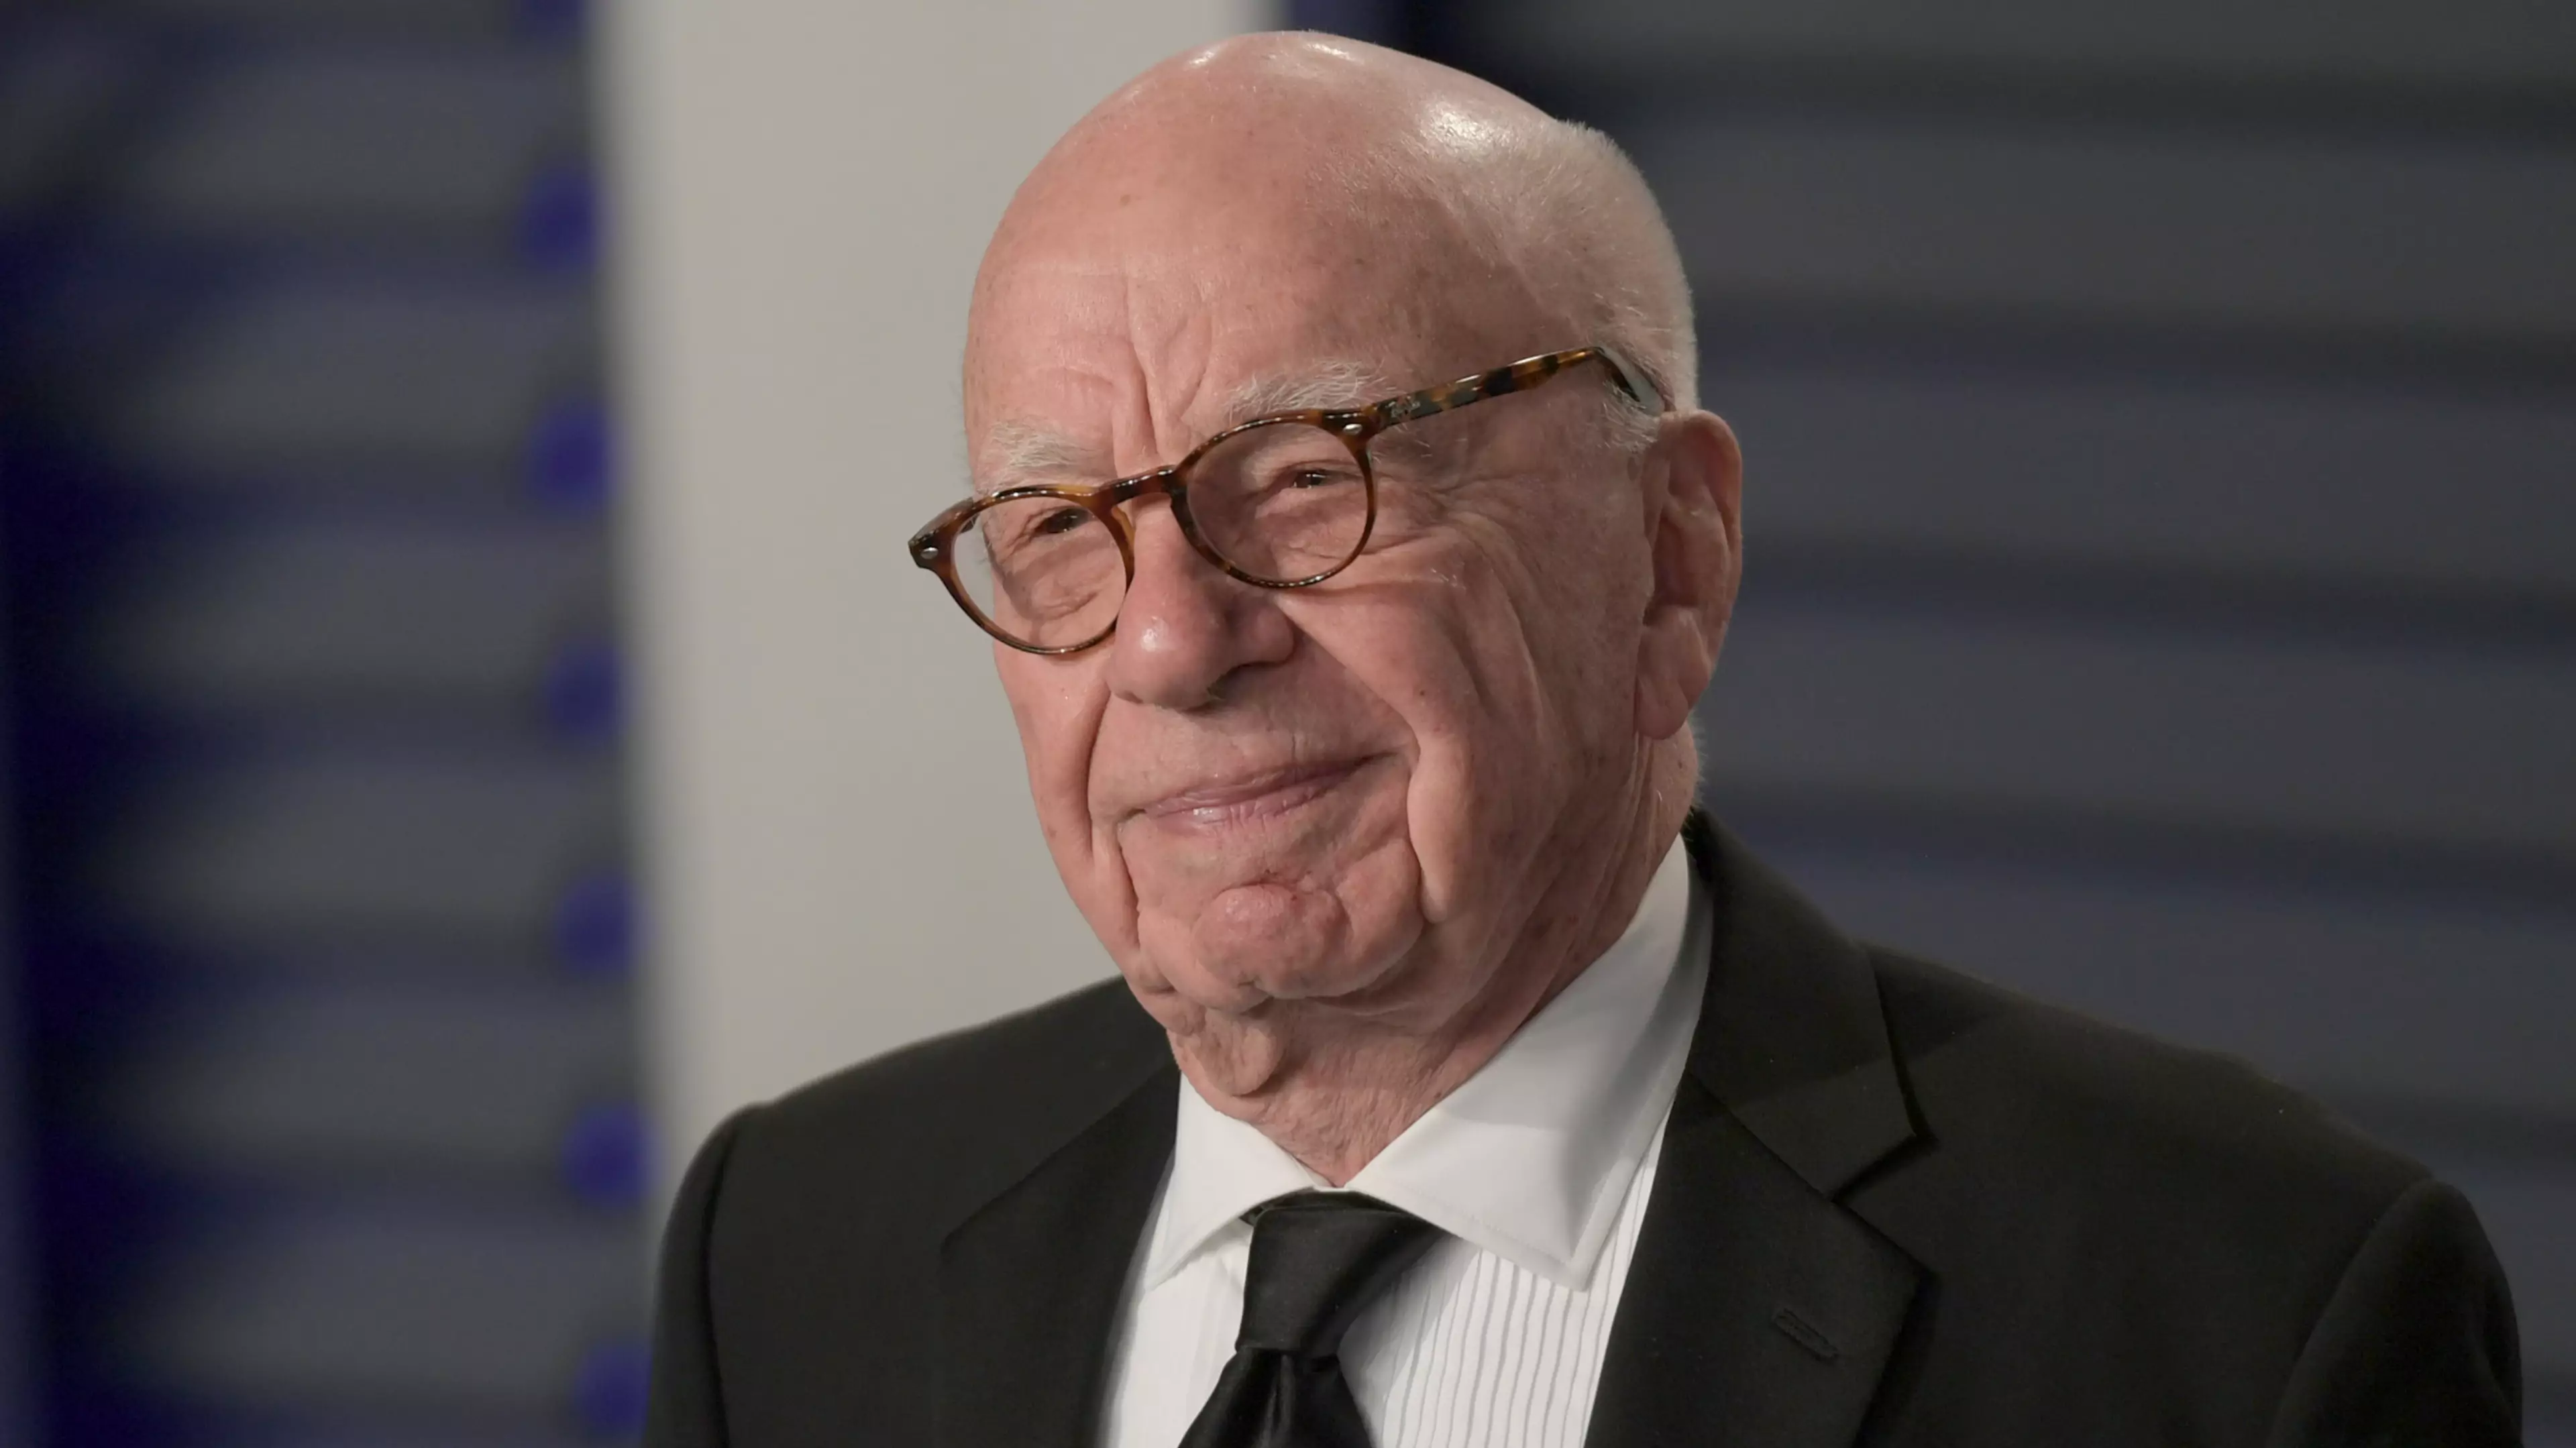 Rupert Murdoch Hits Back At Criticism And Says 'We're Not Climate Change Deniers'